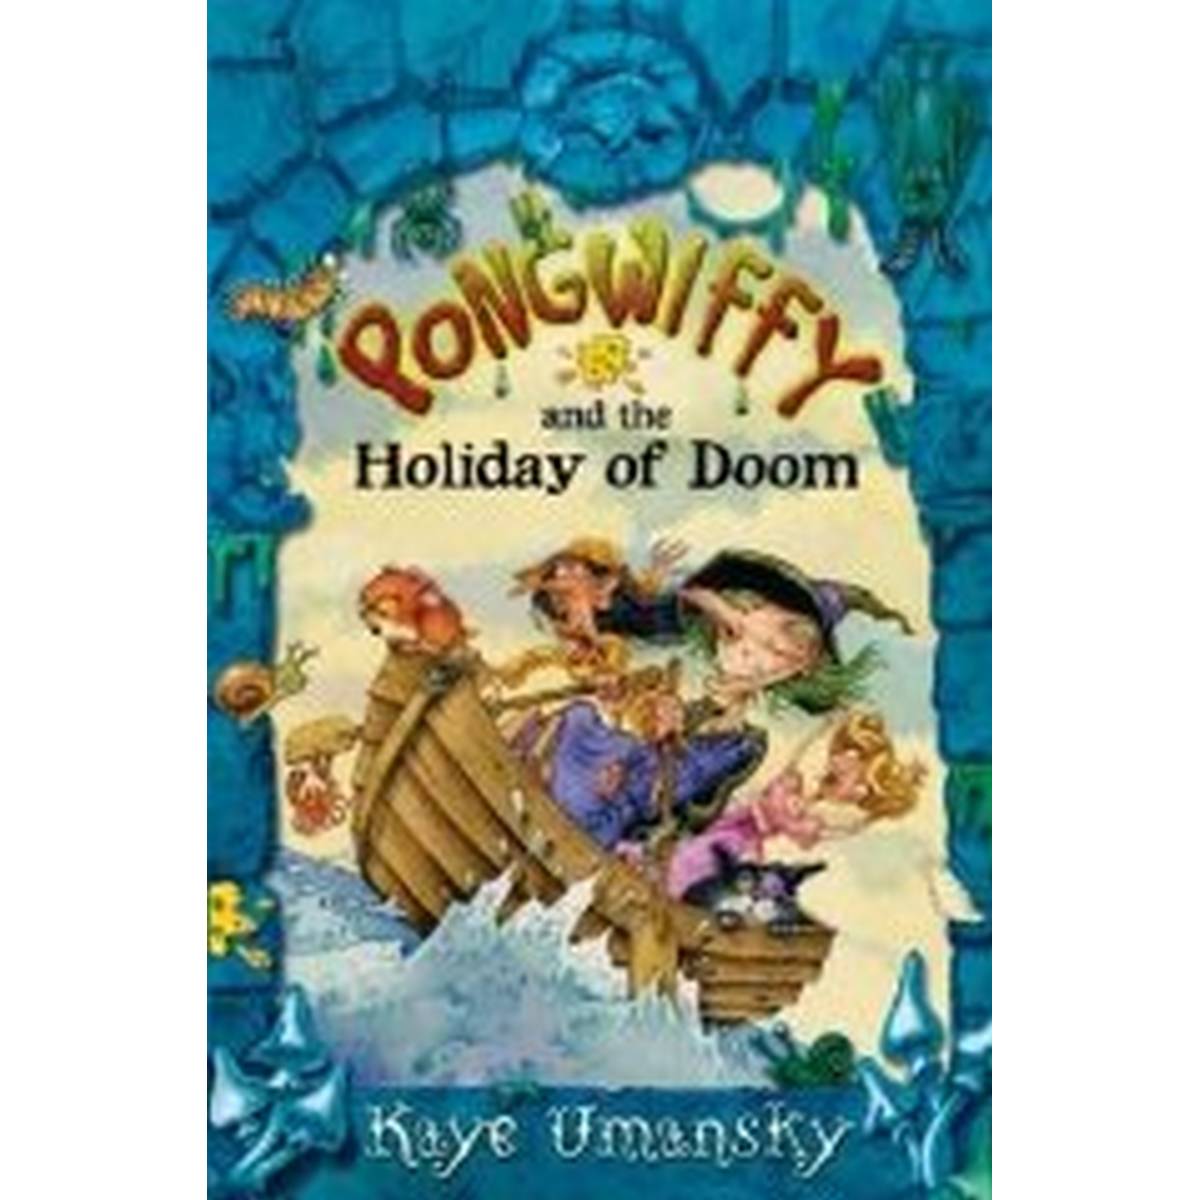 Pongwiffy and the Holiday of Doom